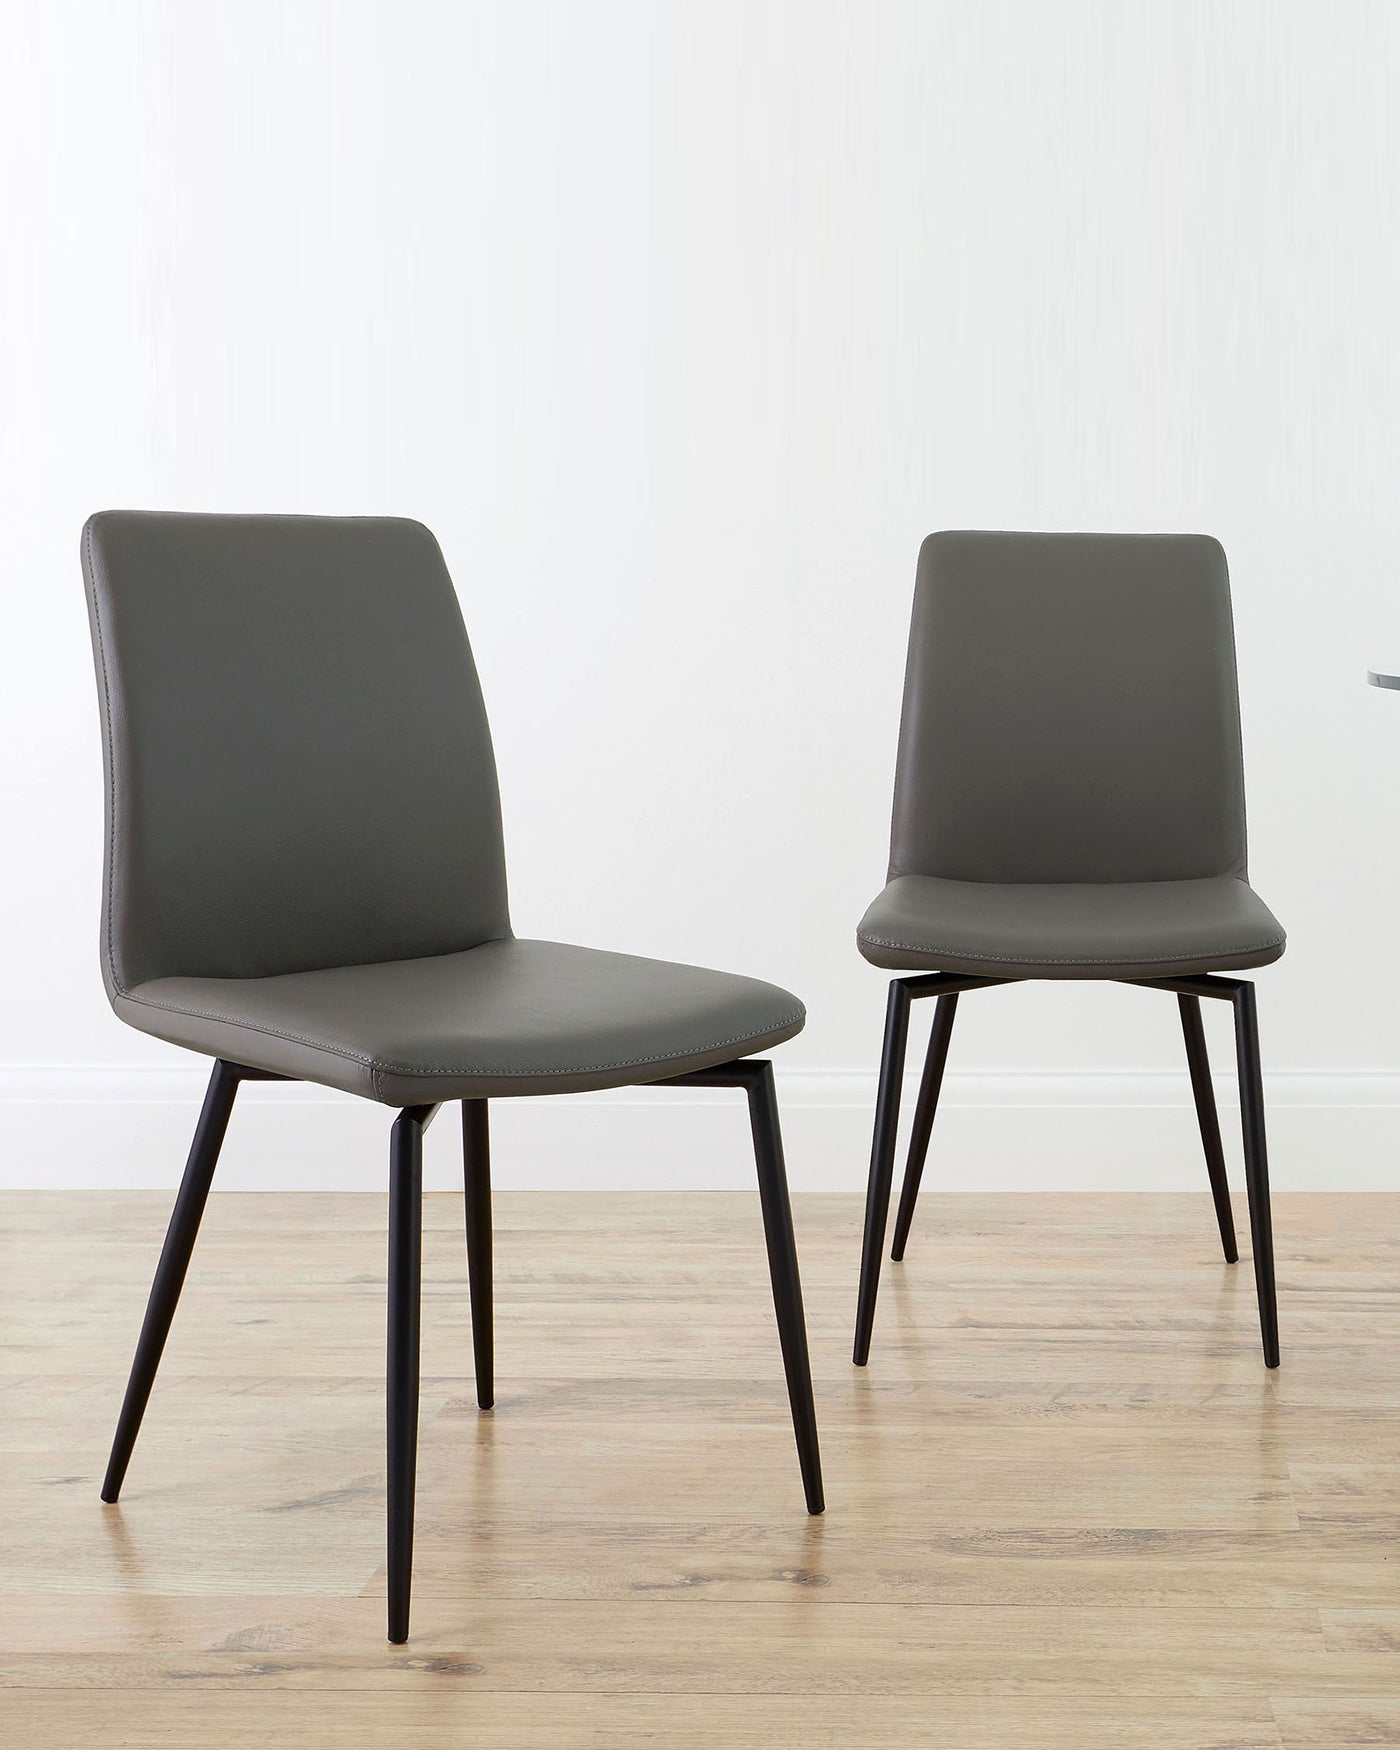 Two modern minimalist dining chairs with dark grey upholstery and black metal legs, positioned on light wood flooring against a white wall.